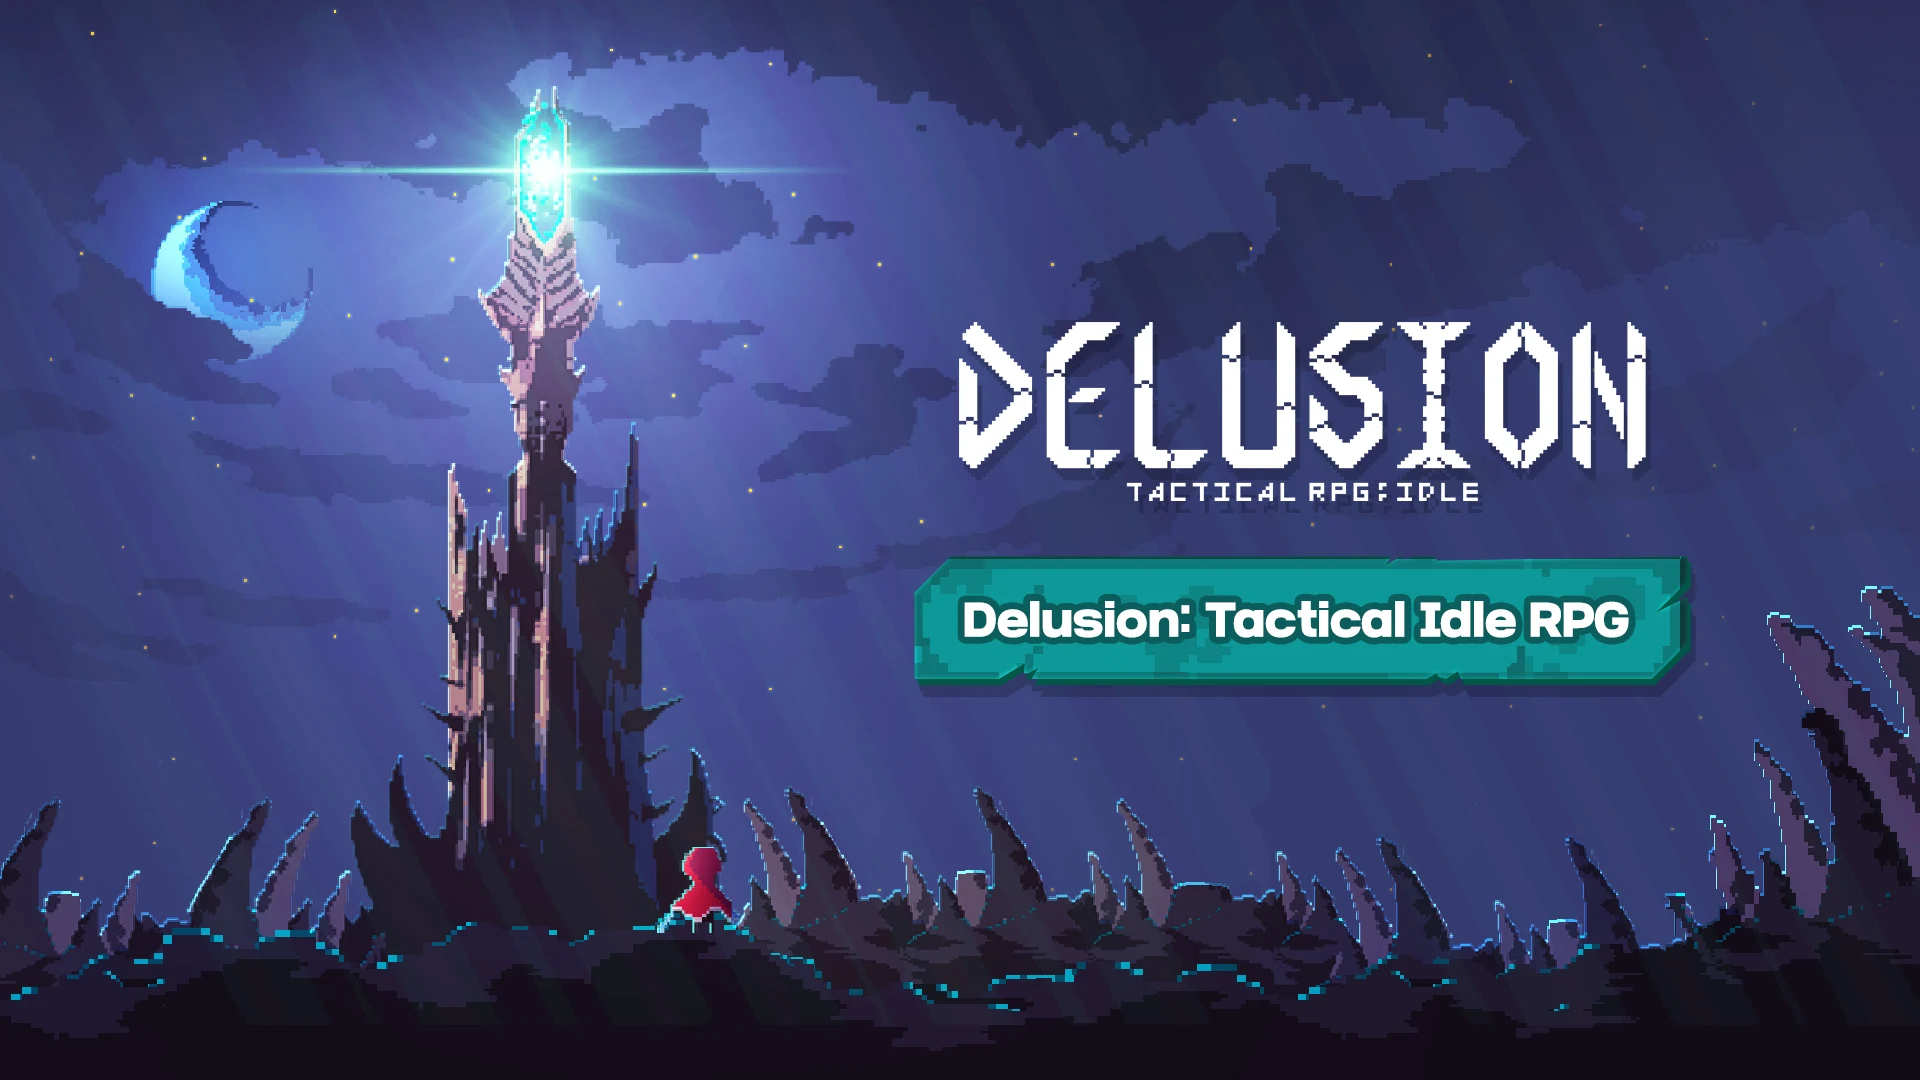 Delusion: Tactical Idle RPG Launches on Android